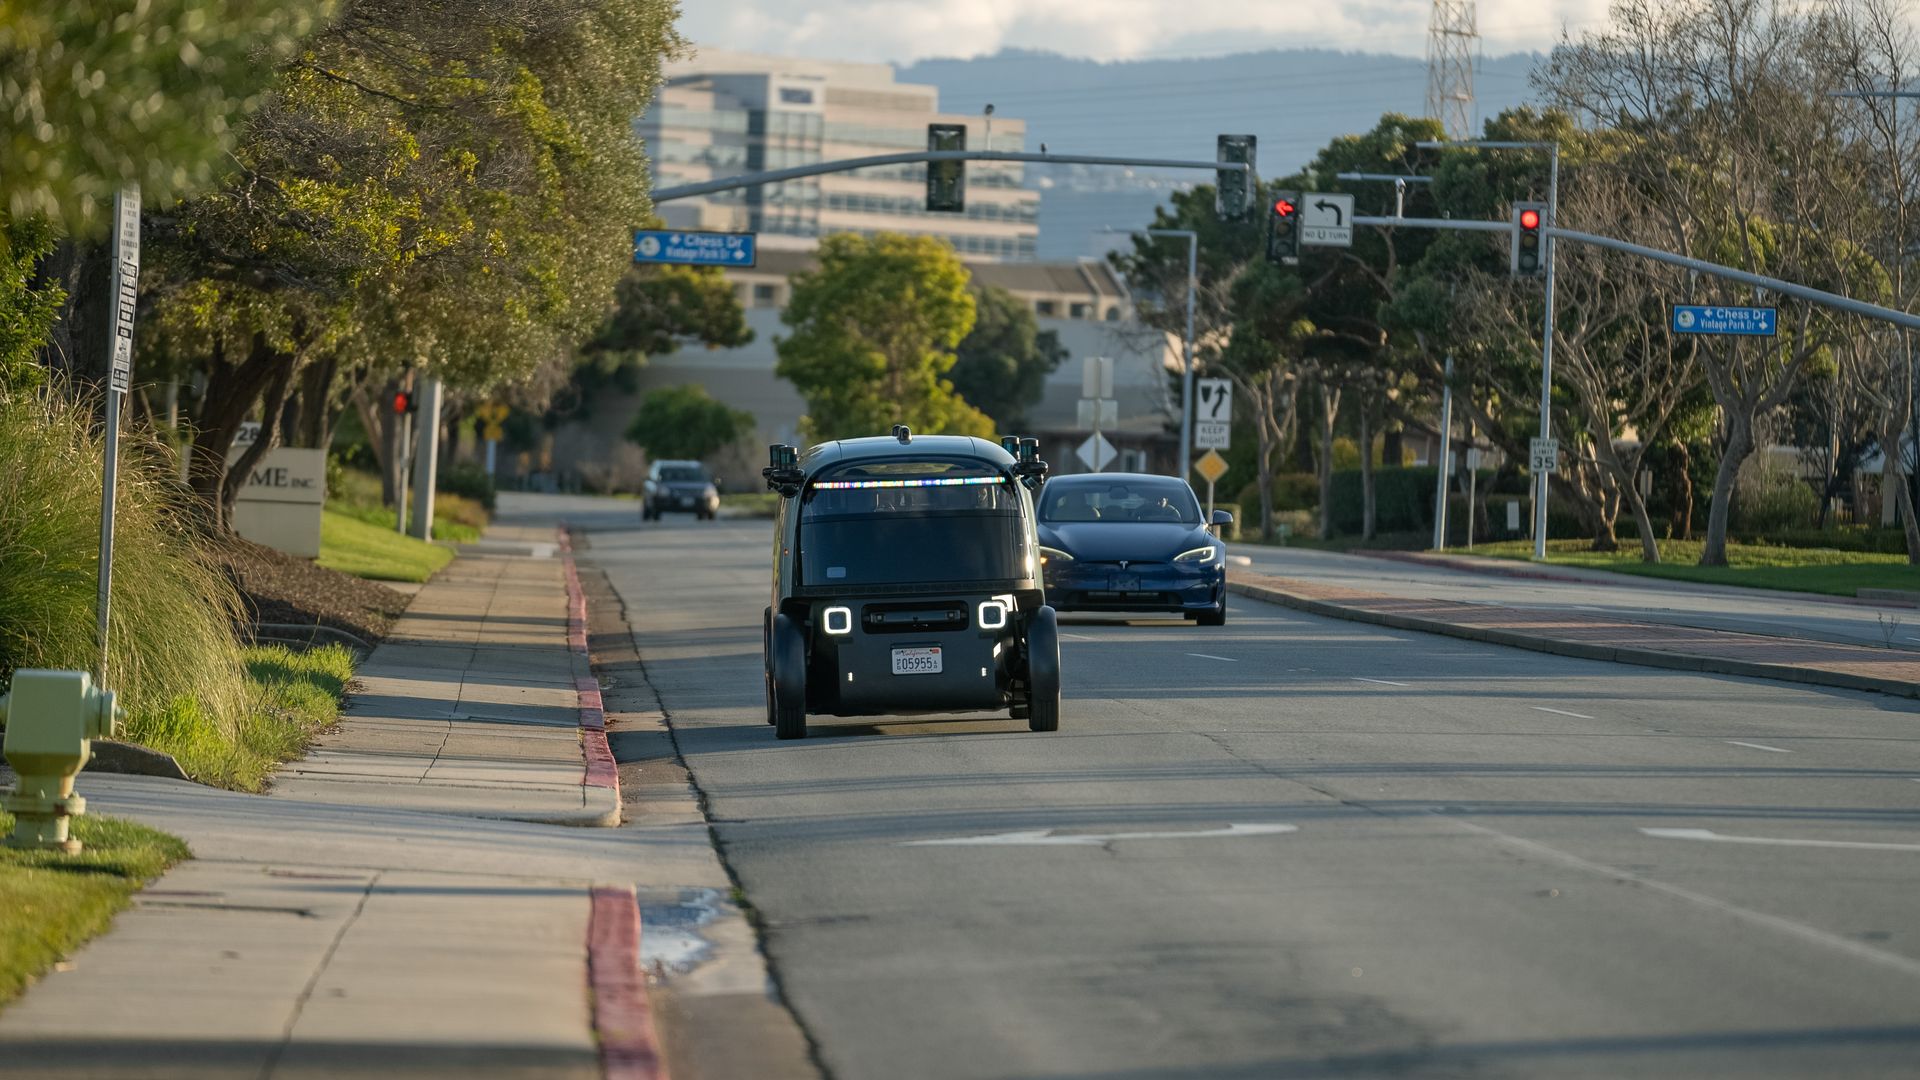 A Zoox robotaxi operating on public roads.